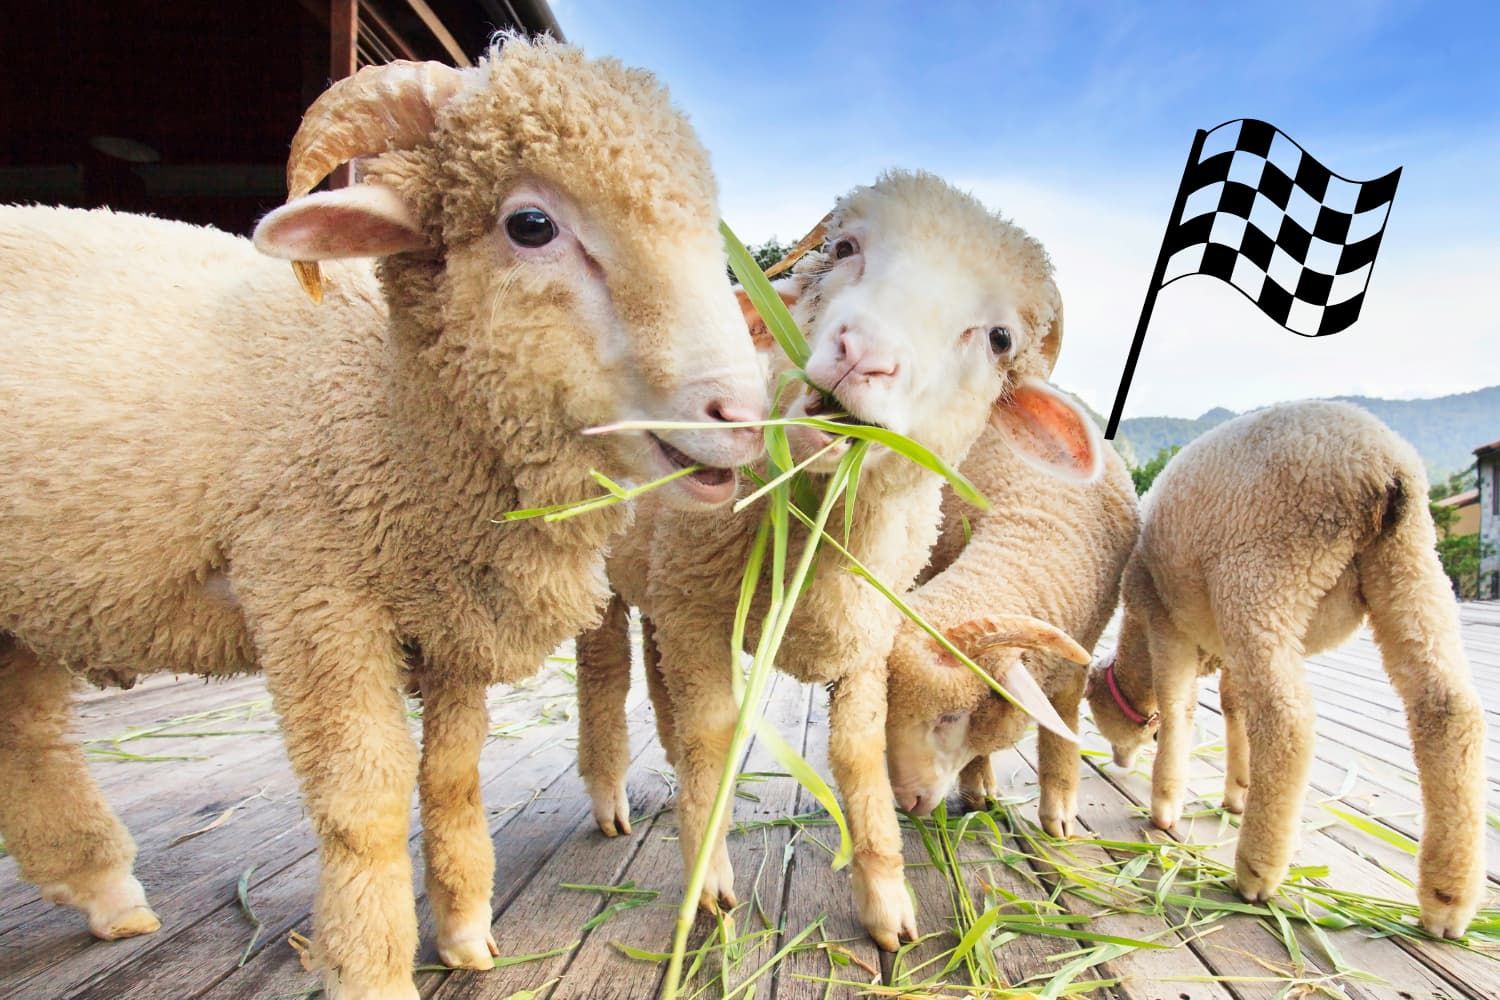 Game%20-%20OT%20Psalm%2023%20-%20The%20feed%20the%20sheep%20relay%20race-6bb58723 Worry / anxiety